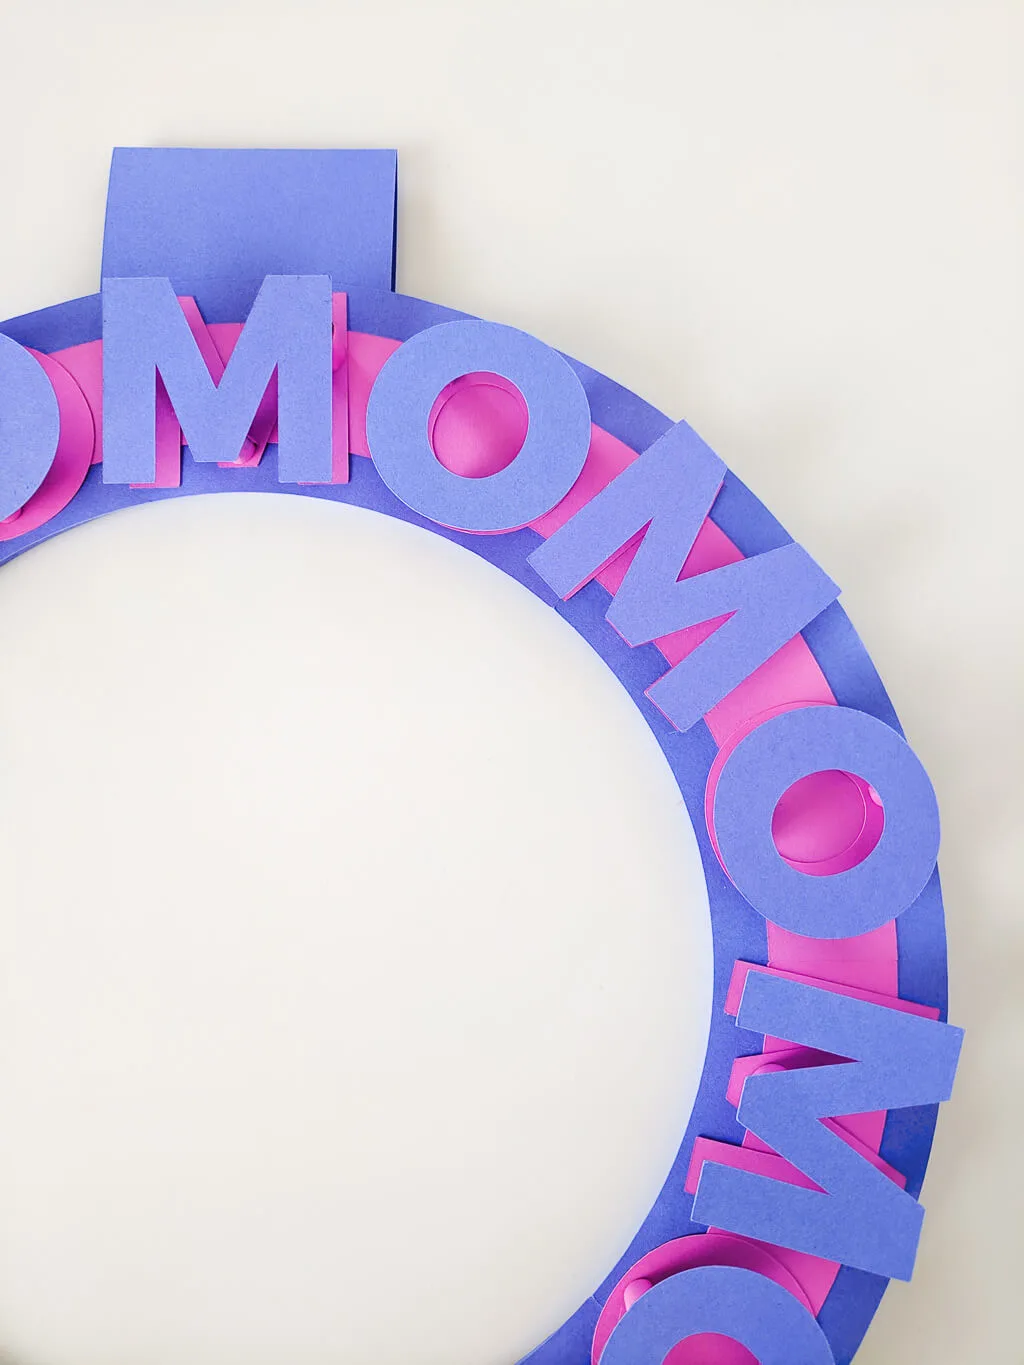 DIY Mother's Day wreath with simple 3D effect